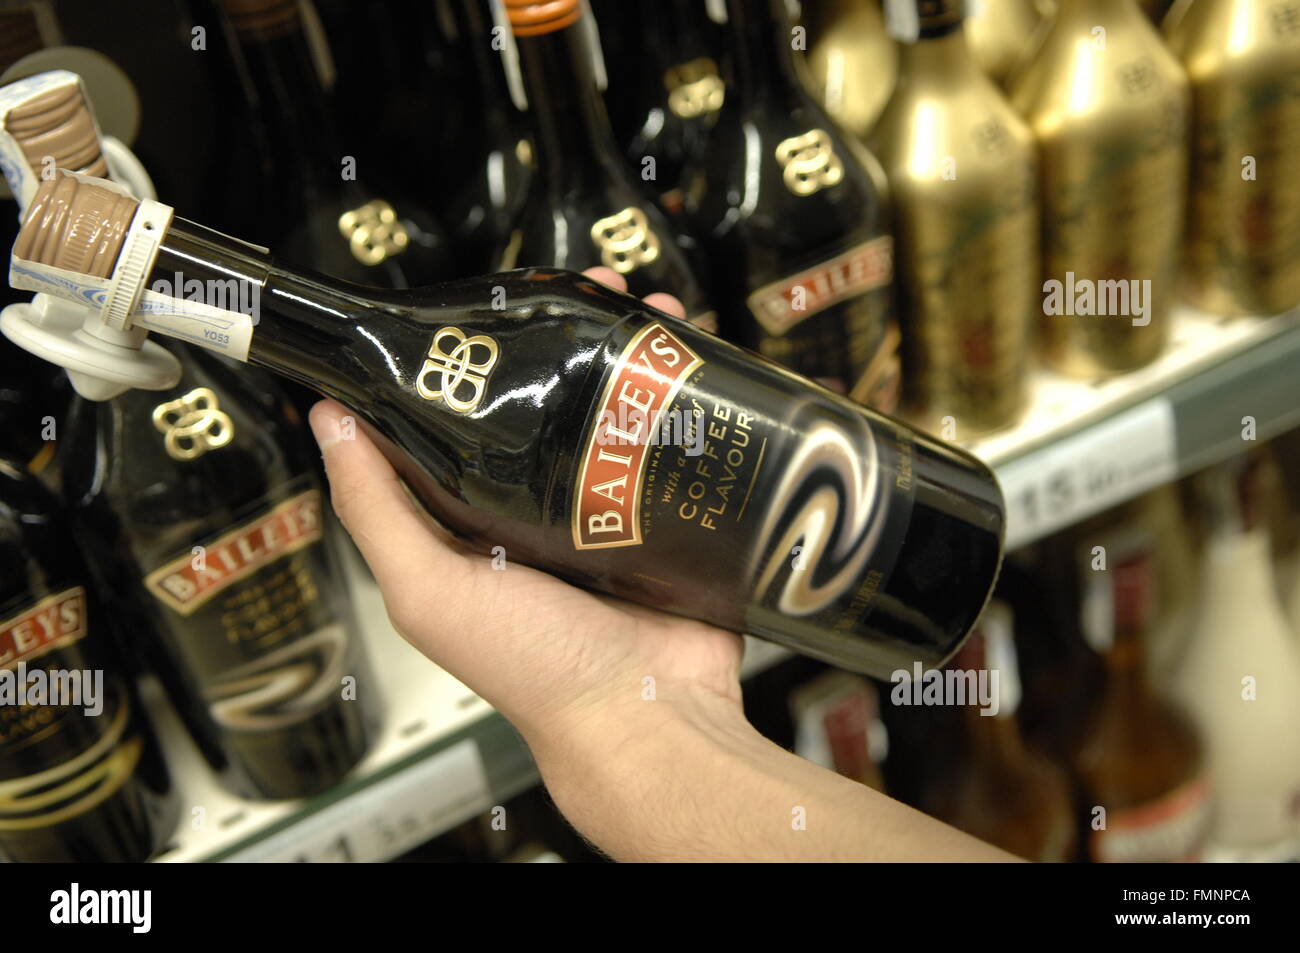 Baileys bottle being held at Carrefour - Malaga, Spain Stock Photo